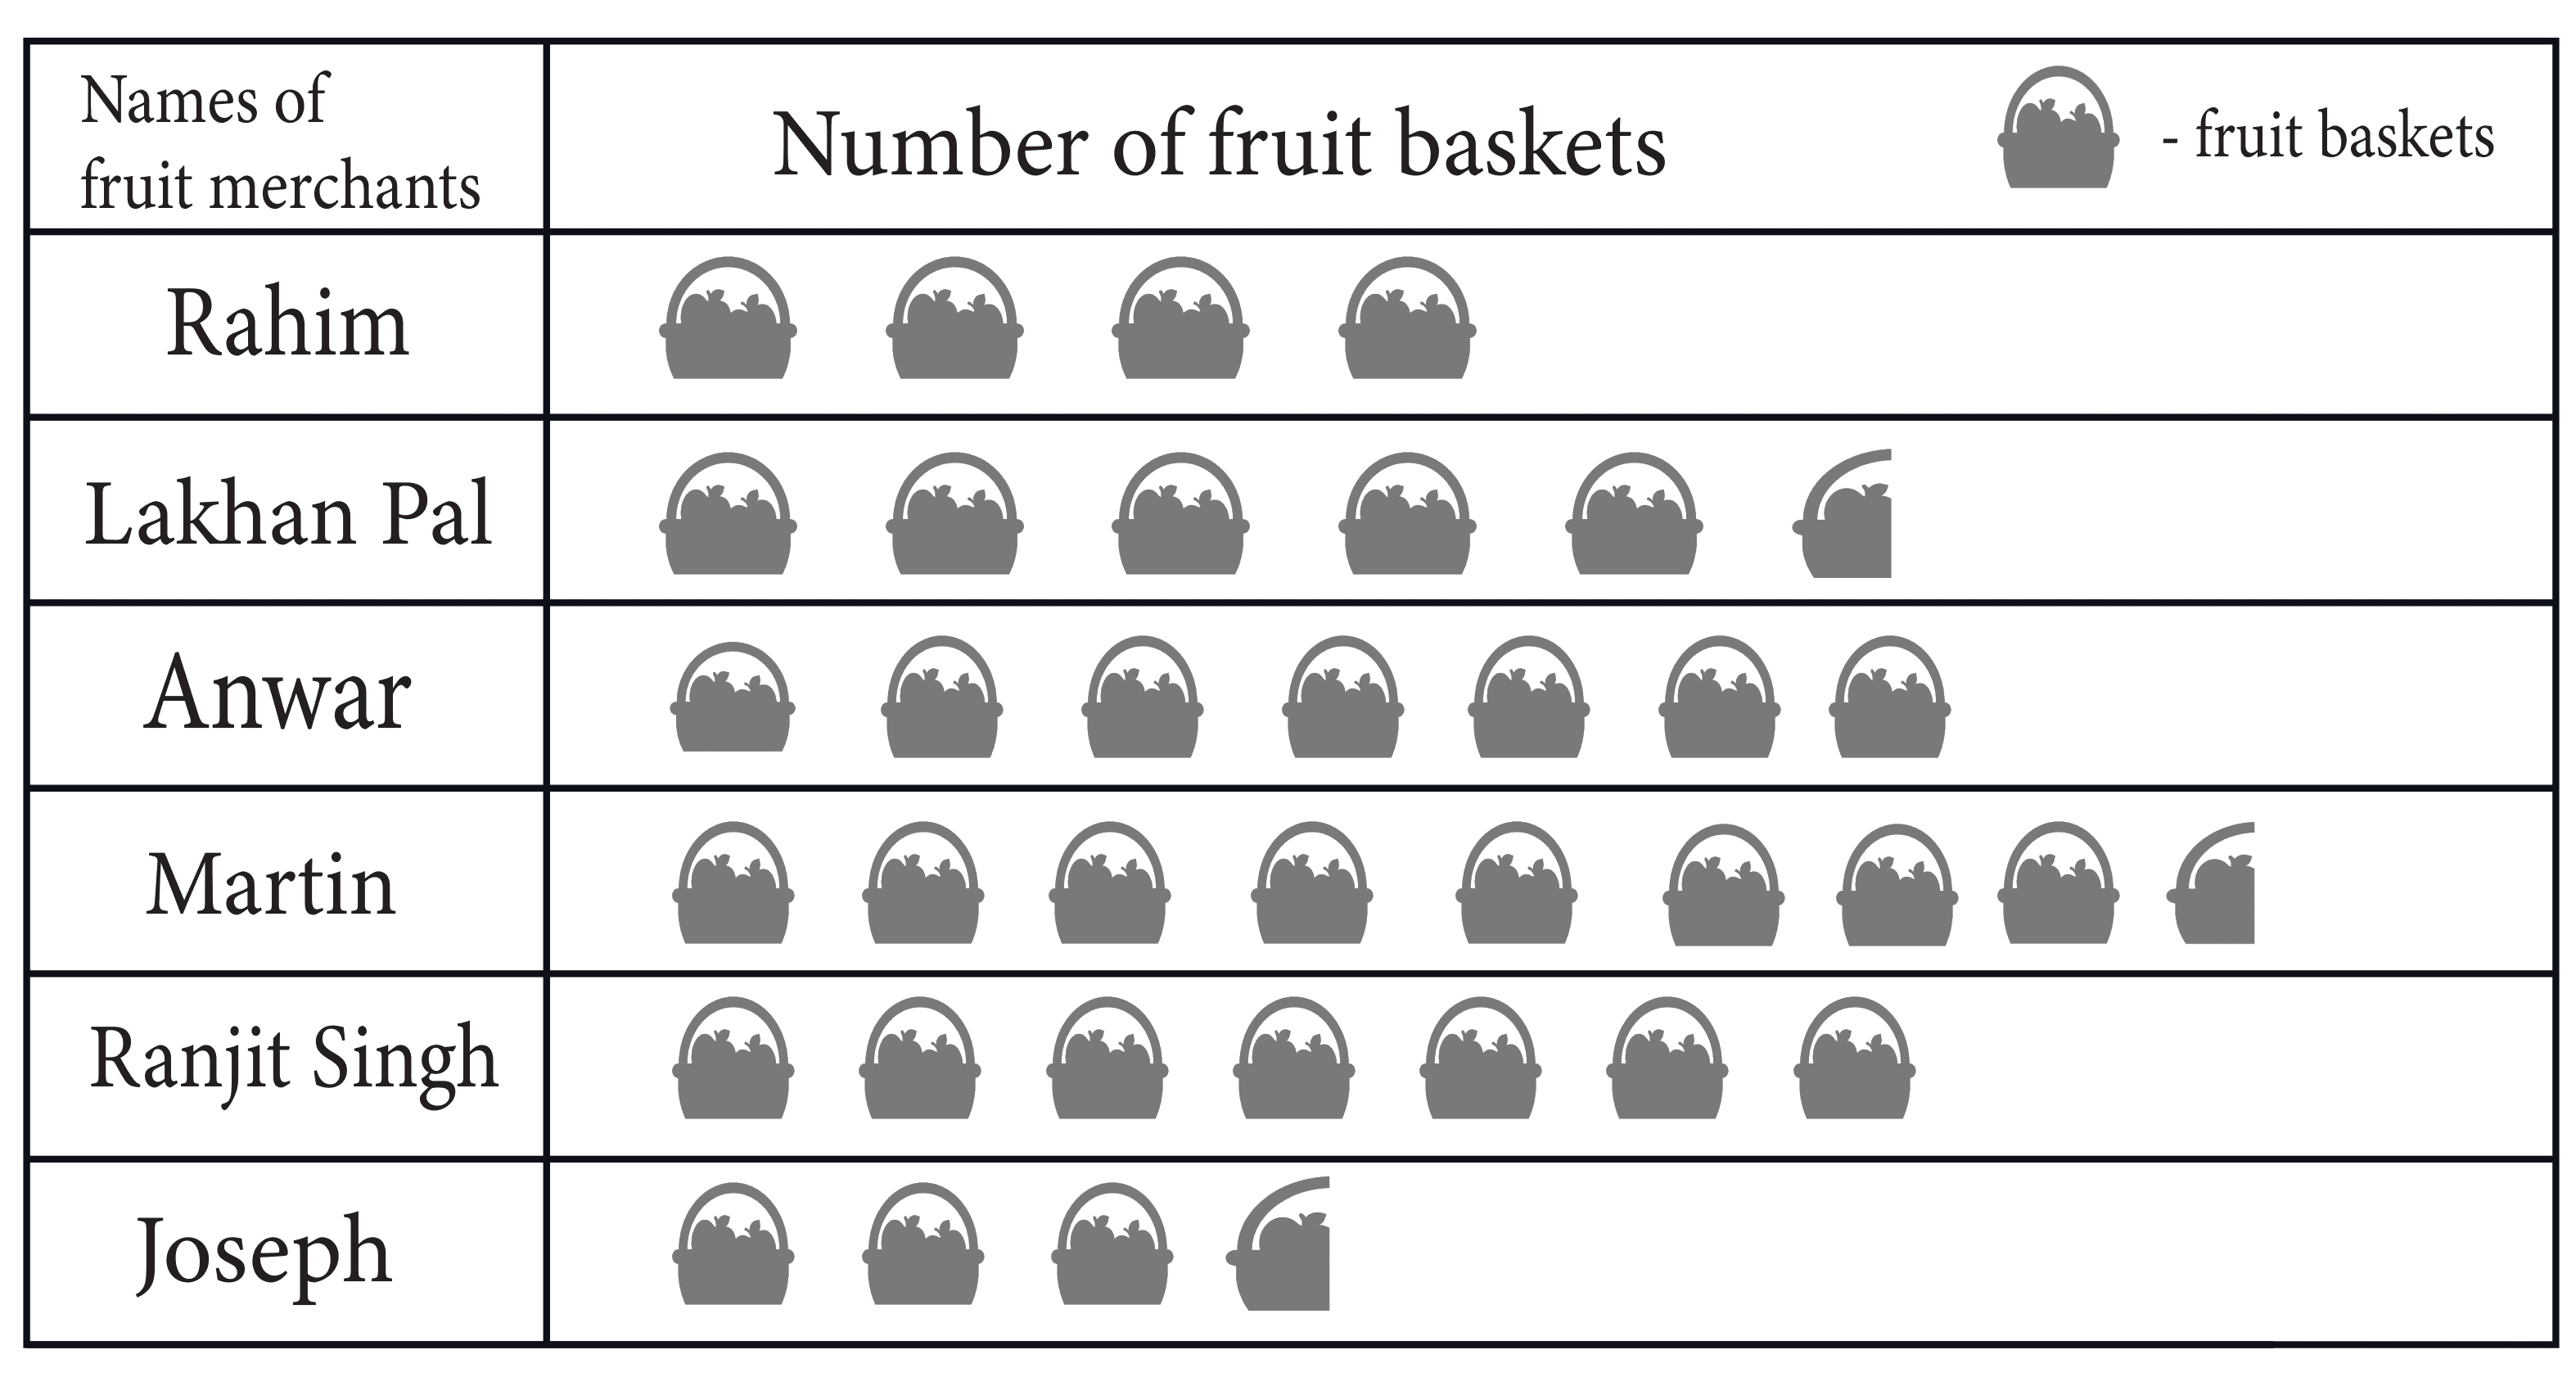 Number of fruit baskets  with different fruit merchants